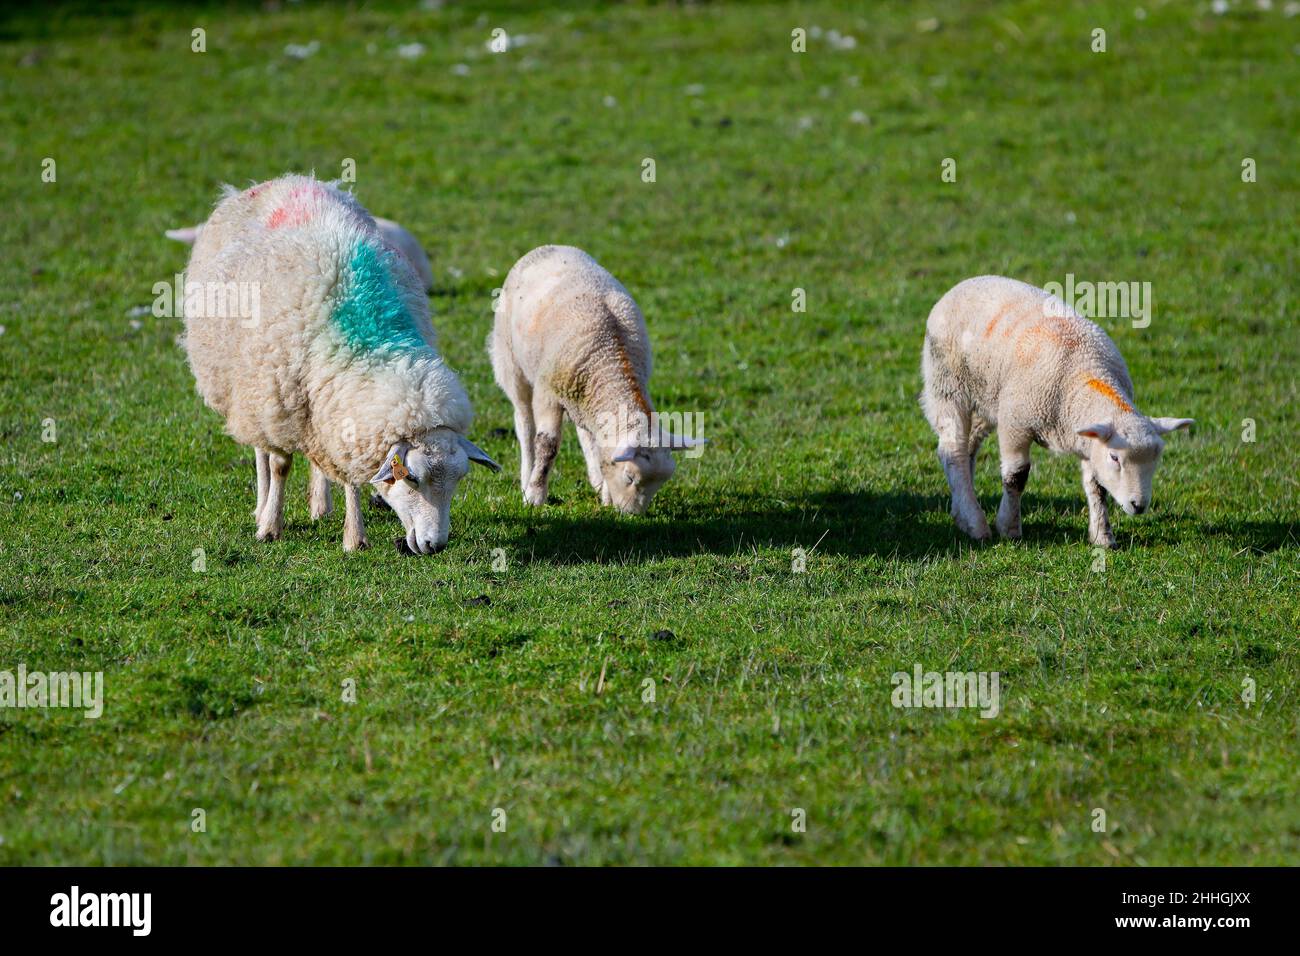 Mother Ewe grazes in an Anglesey field with her twins Stock Photo